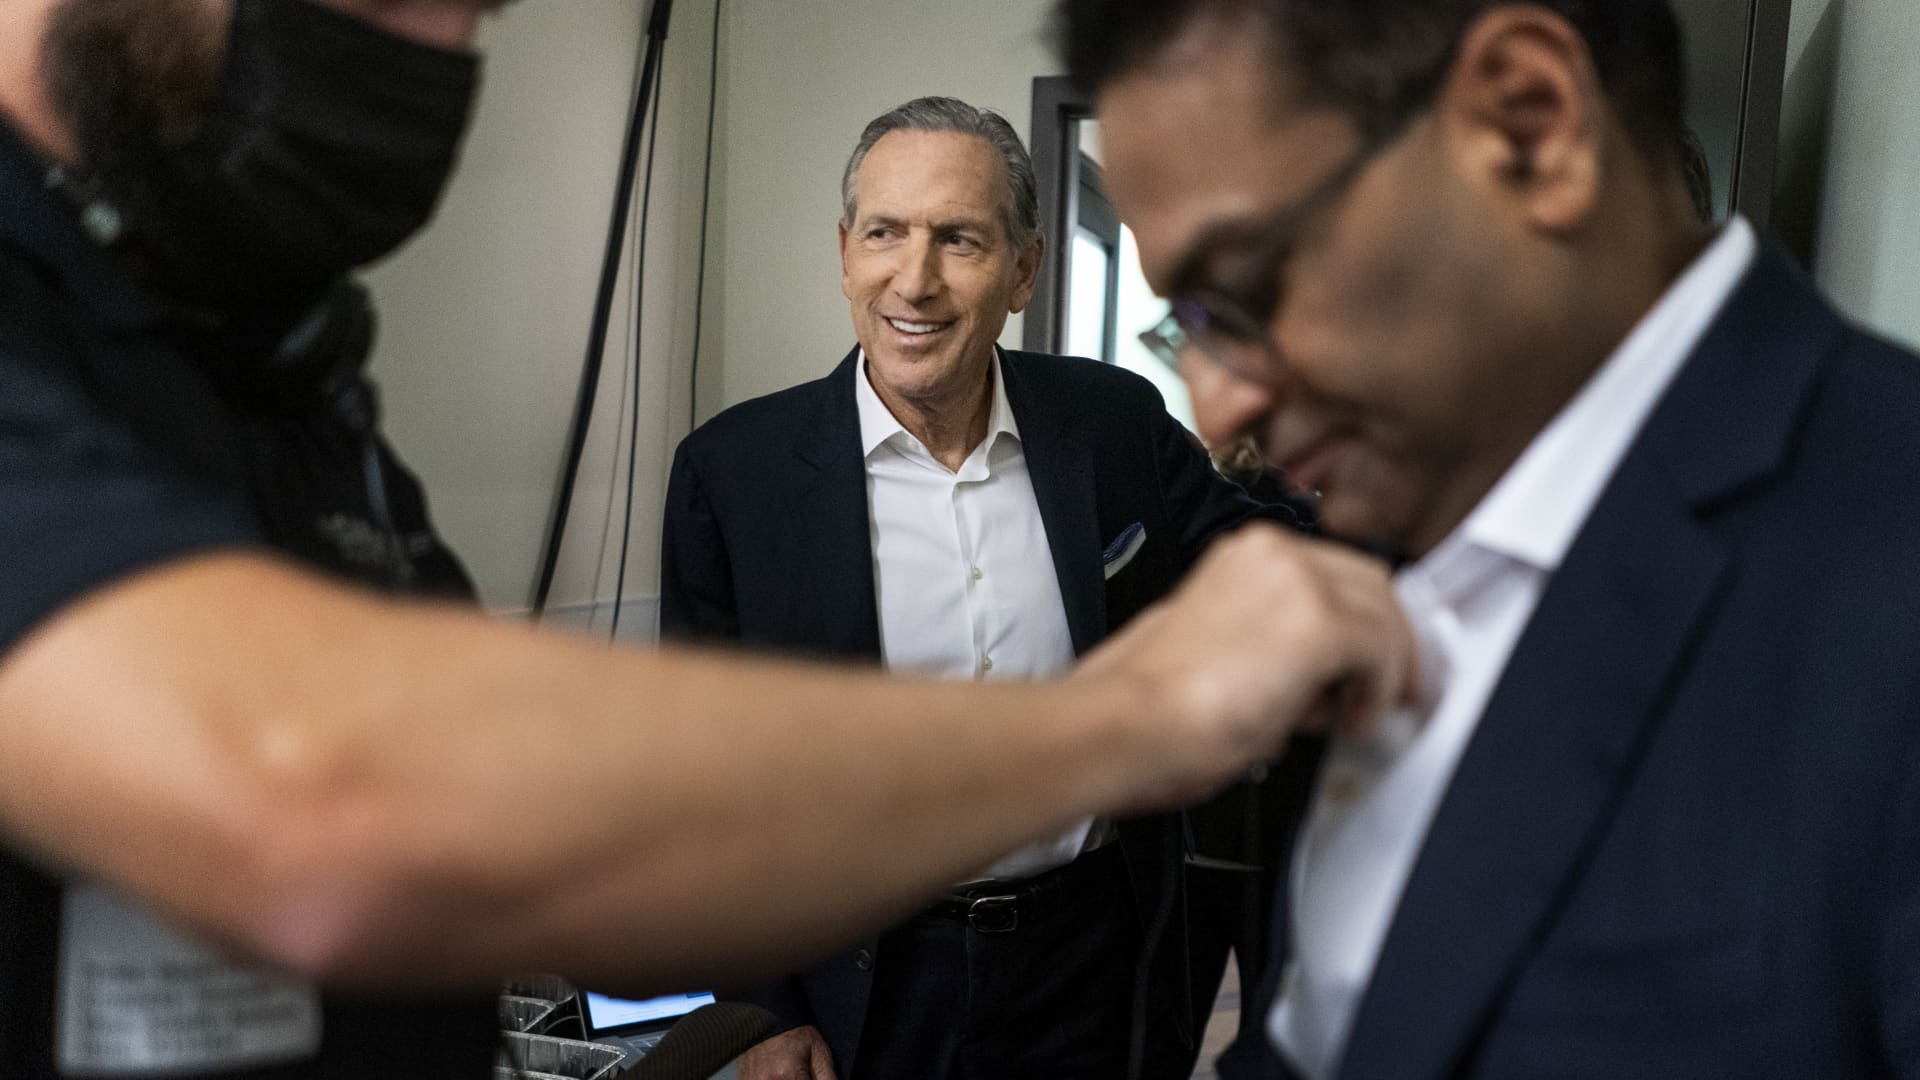 CEO of Starbucks Howard Schultz back stage with soon to be Starbucks CEO Laxman Narasimhan at Starbucks Headquarters during Investor Day in Seattle, Washington Tuesday September 13, 2022.